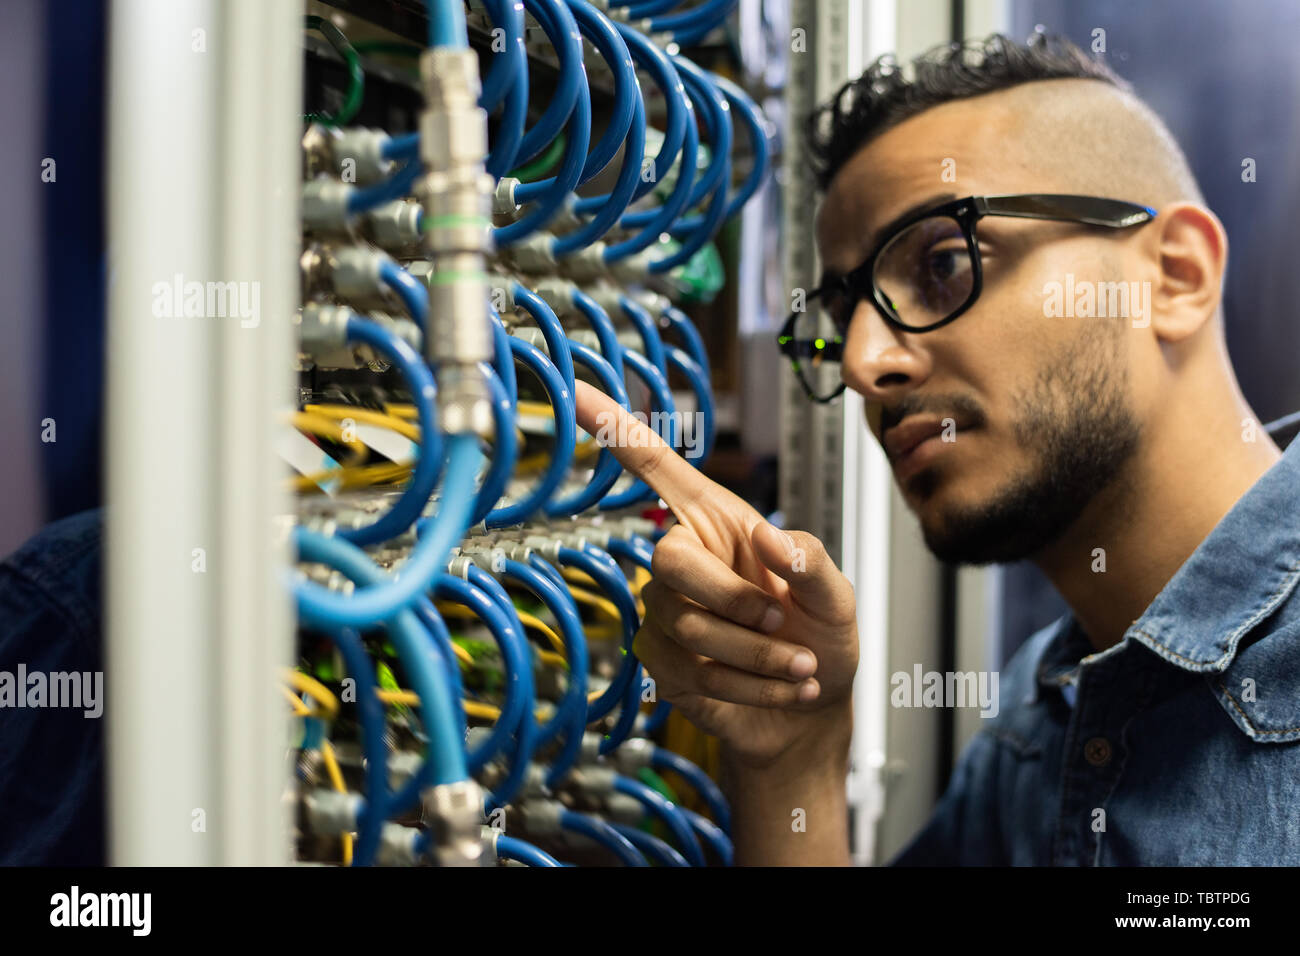 Middle-eastern network engineer checking cables Stock Photo